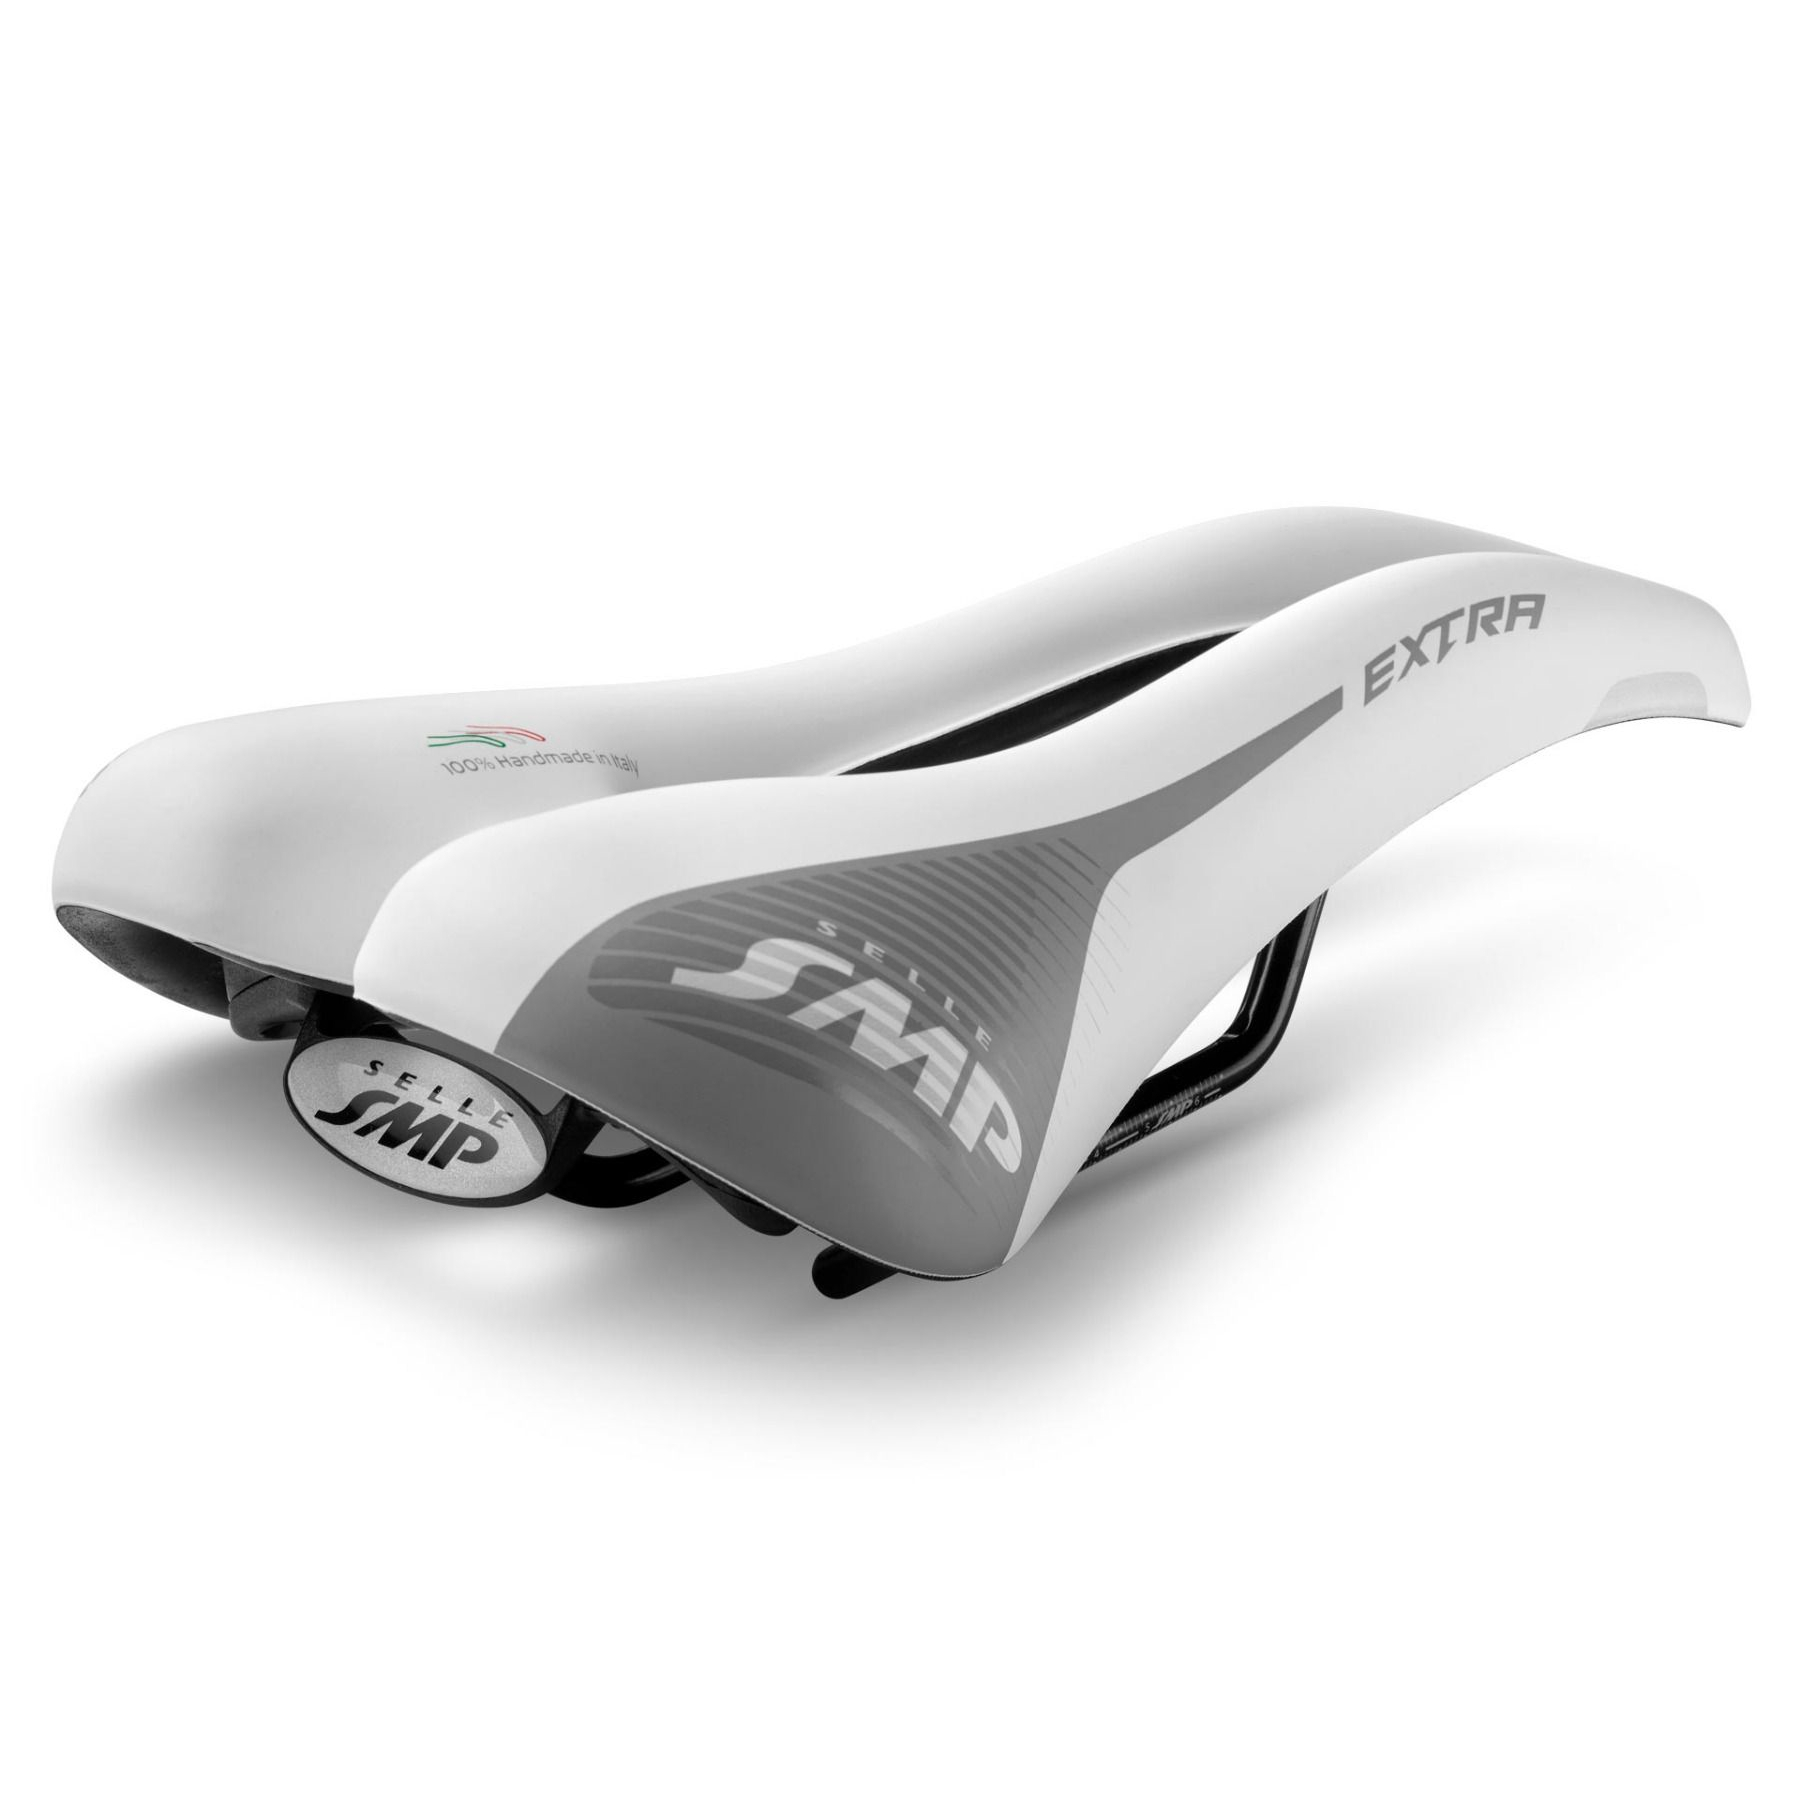 Picture of Selle SMP Extra Saddle - white